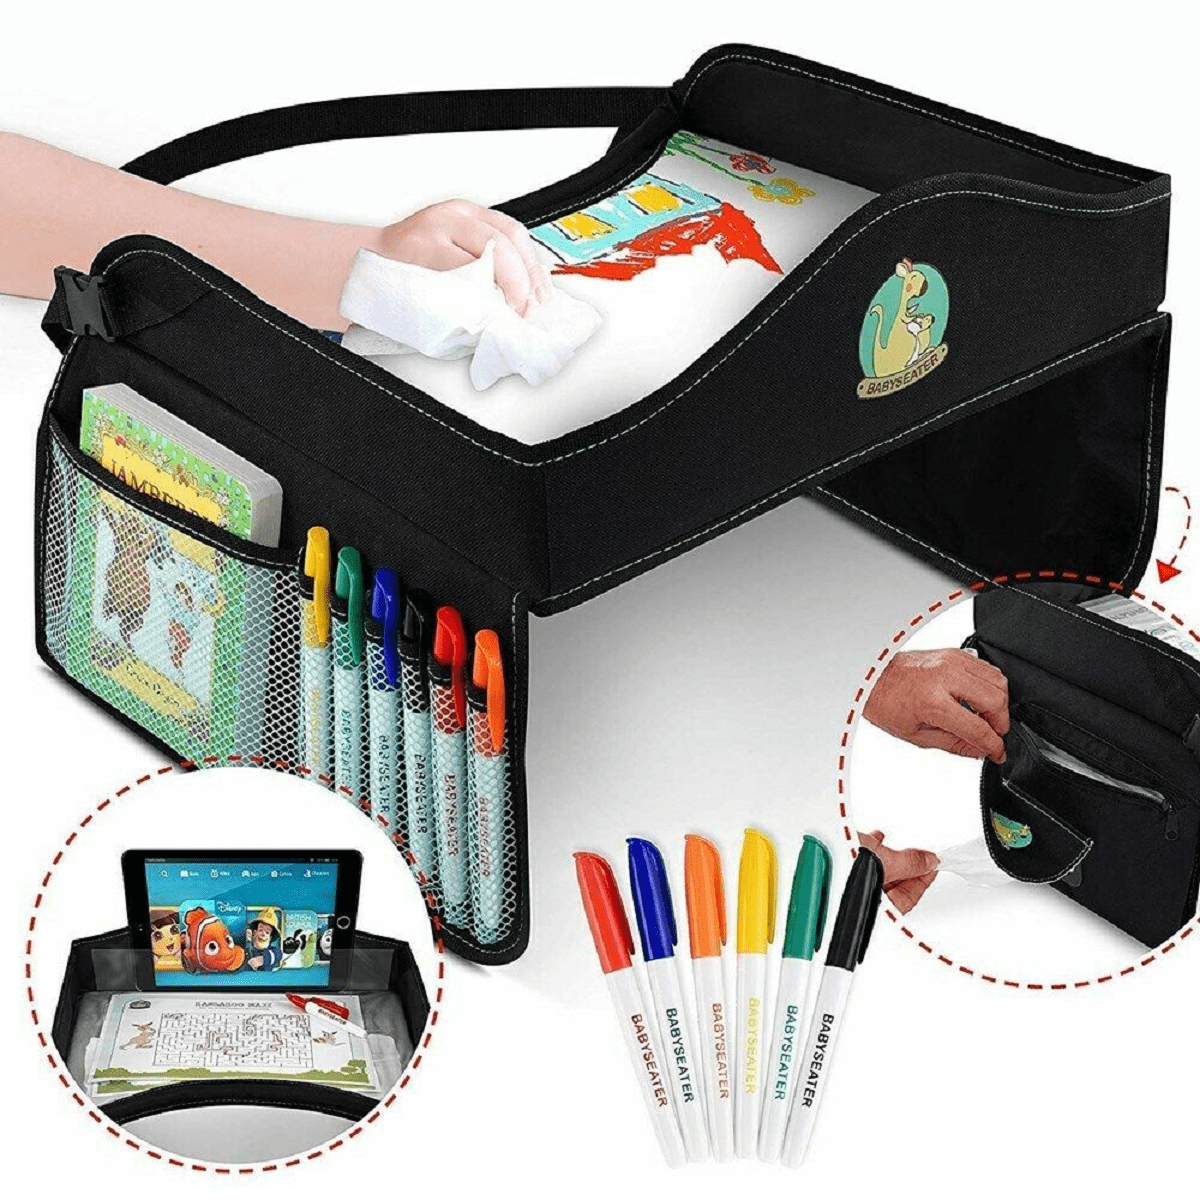 6 Mark Pens with Strong Buckles Mesh Pockets Organiser Bag Car Activity Trays Toy Organiser for Auto Stroller Pushchair Sofa Child Play Lap Tray with Dry Erasable Top Snack & Play Travel Tray